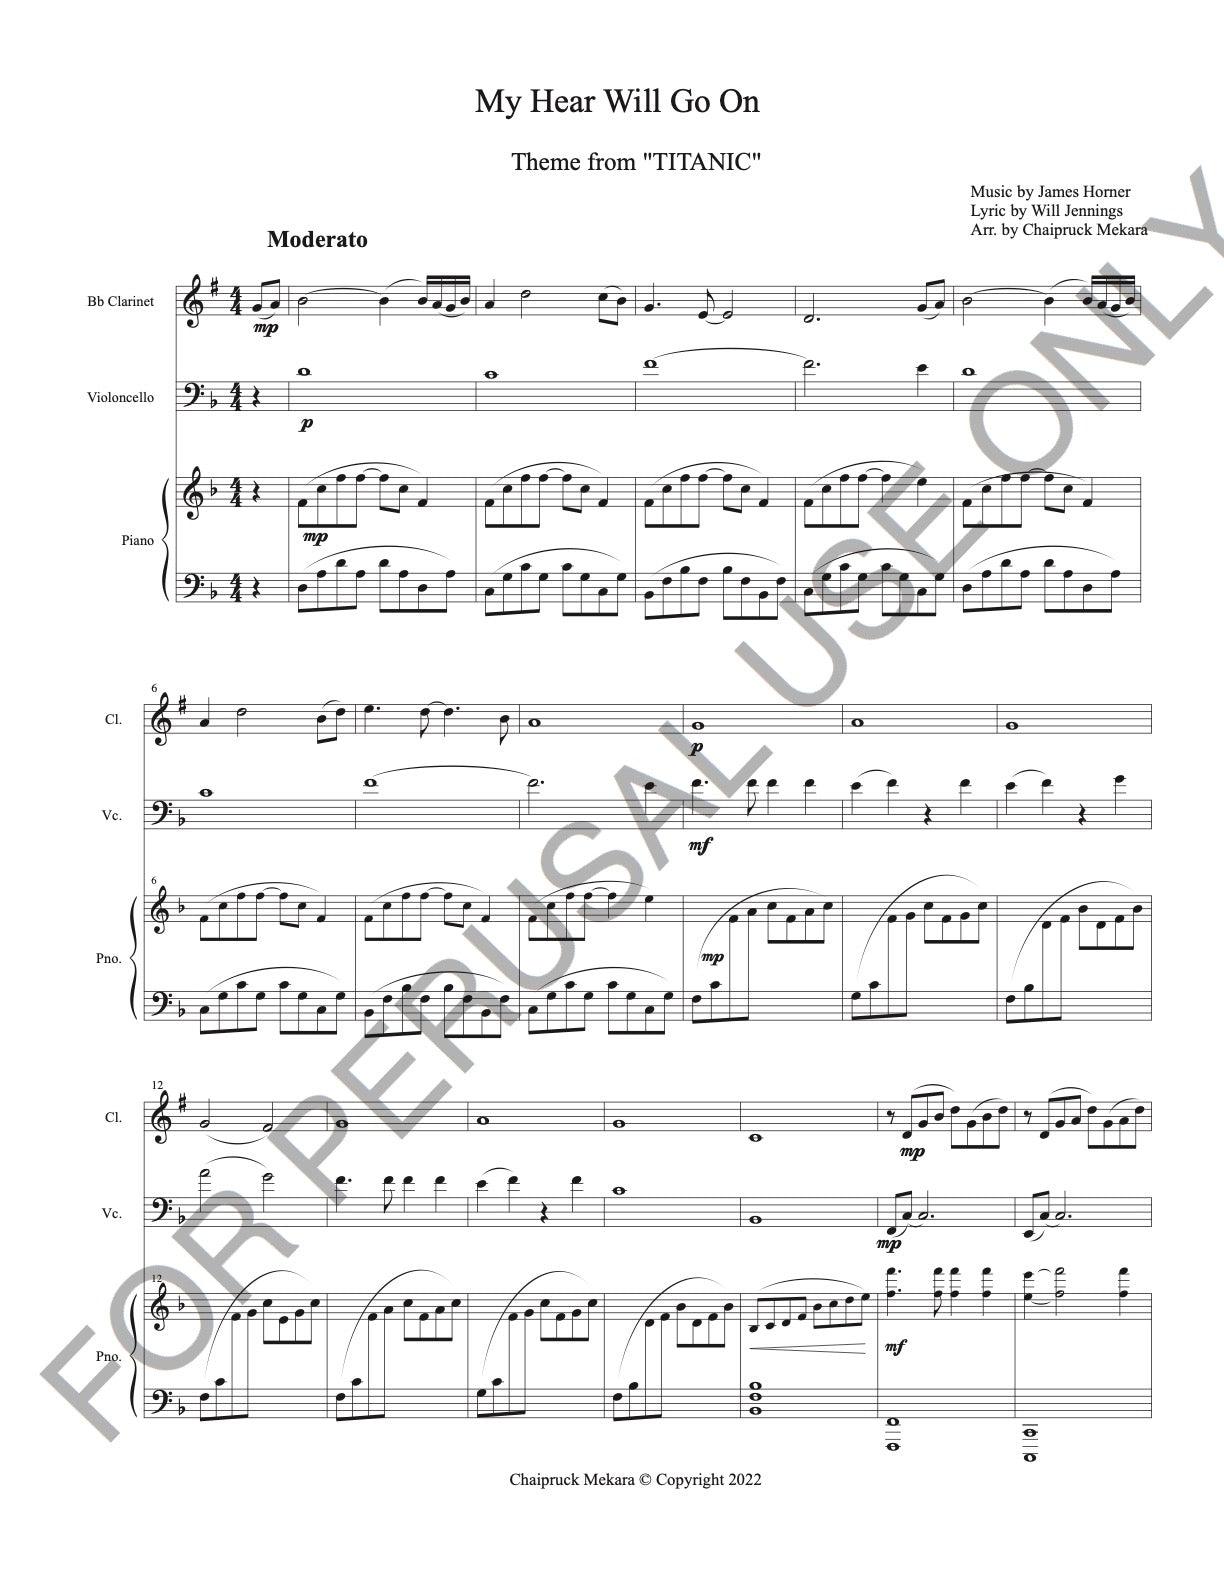 Clarinet, Cello and Piano sheet music: My Heart will go on from Titanic